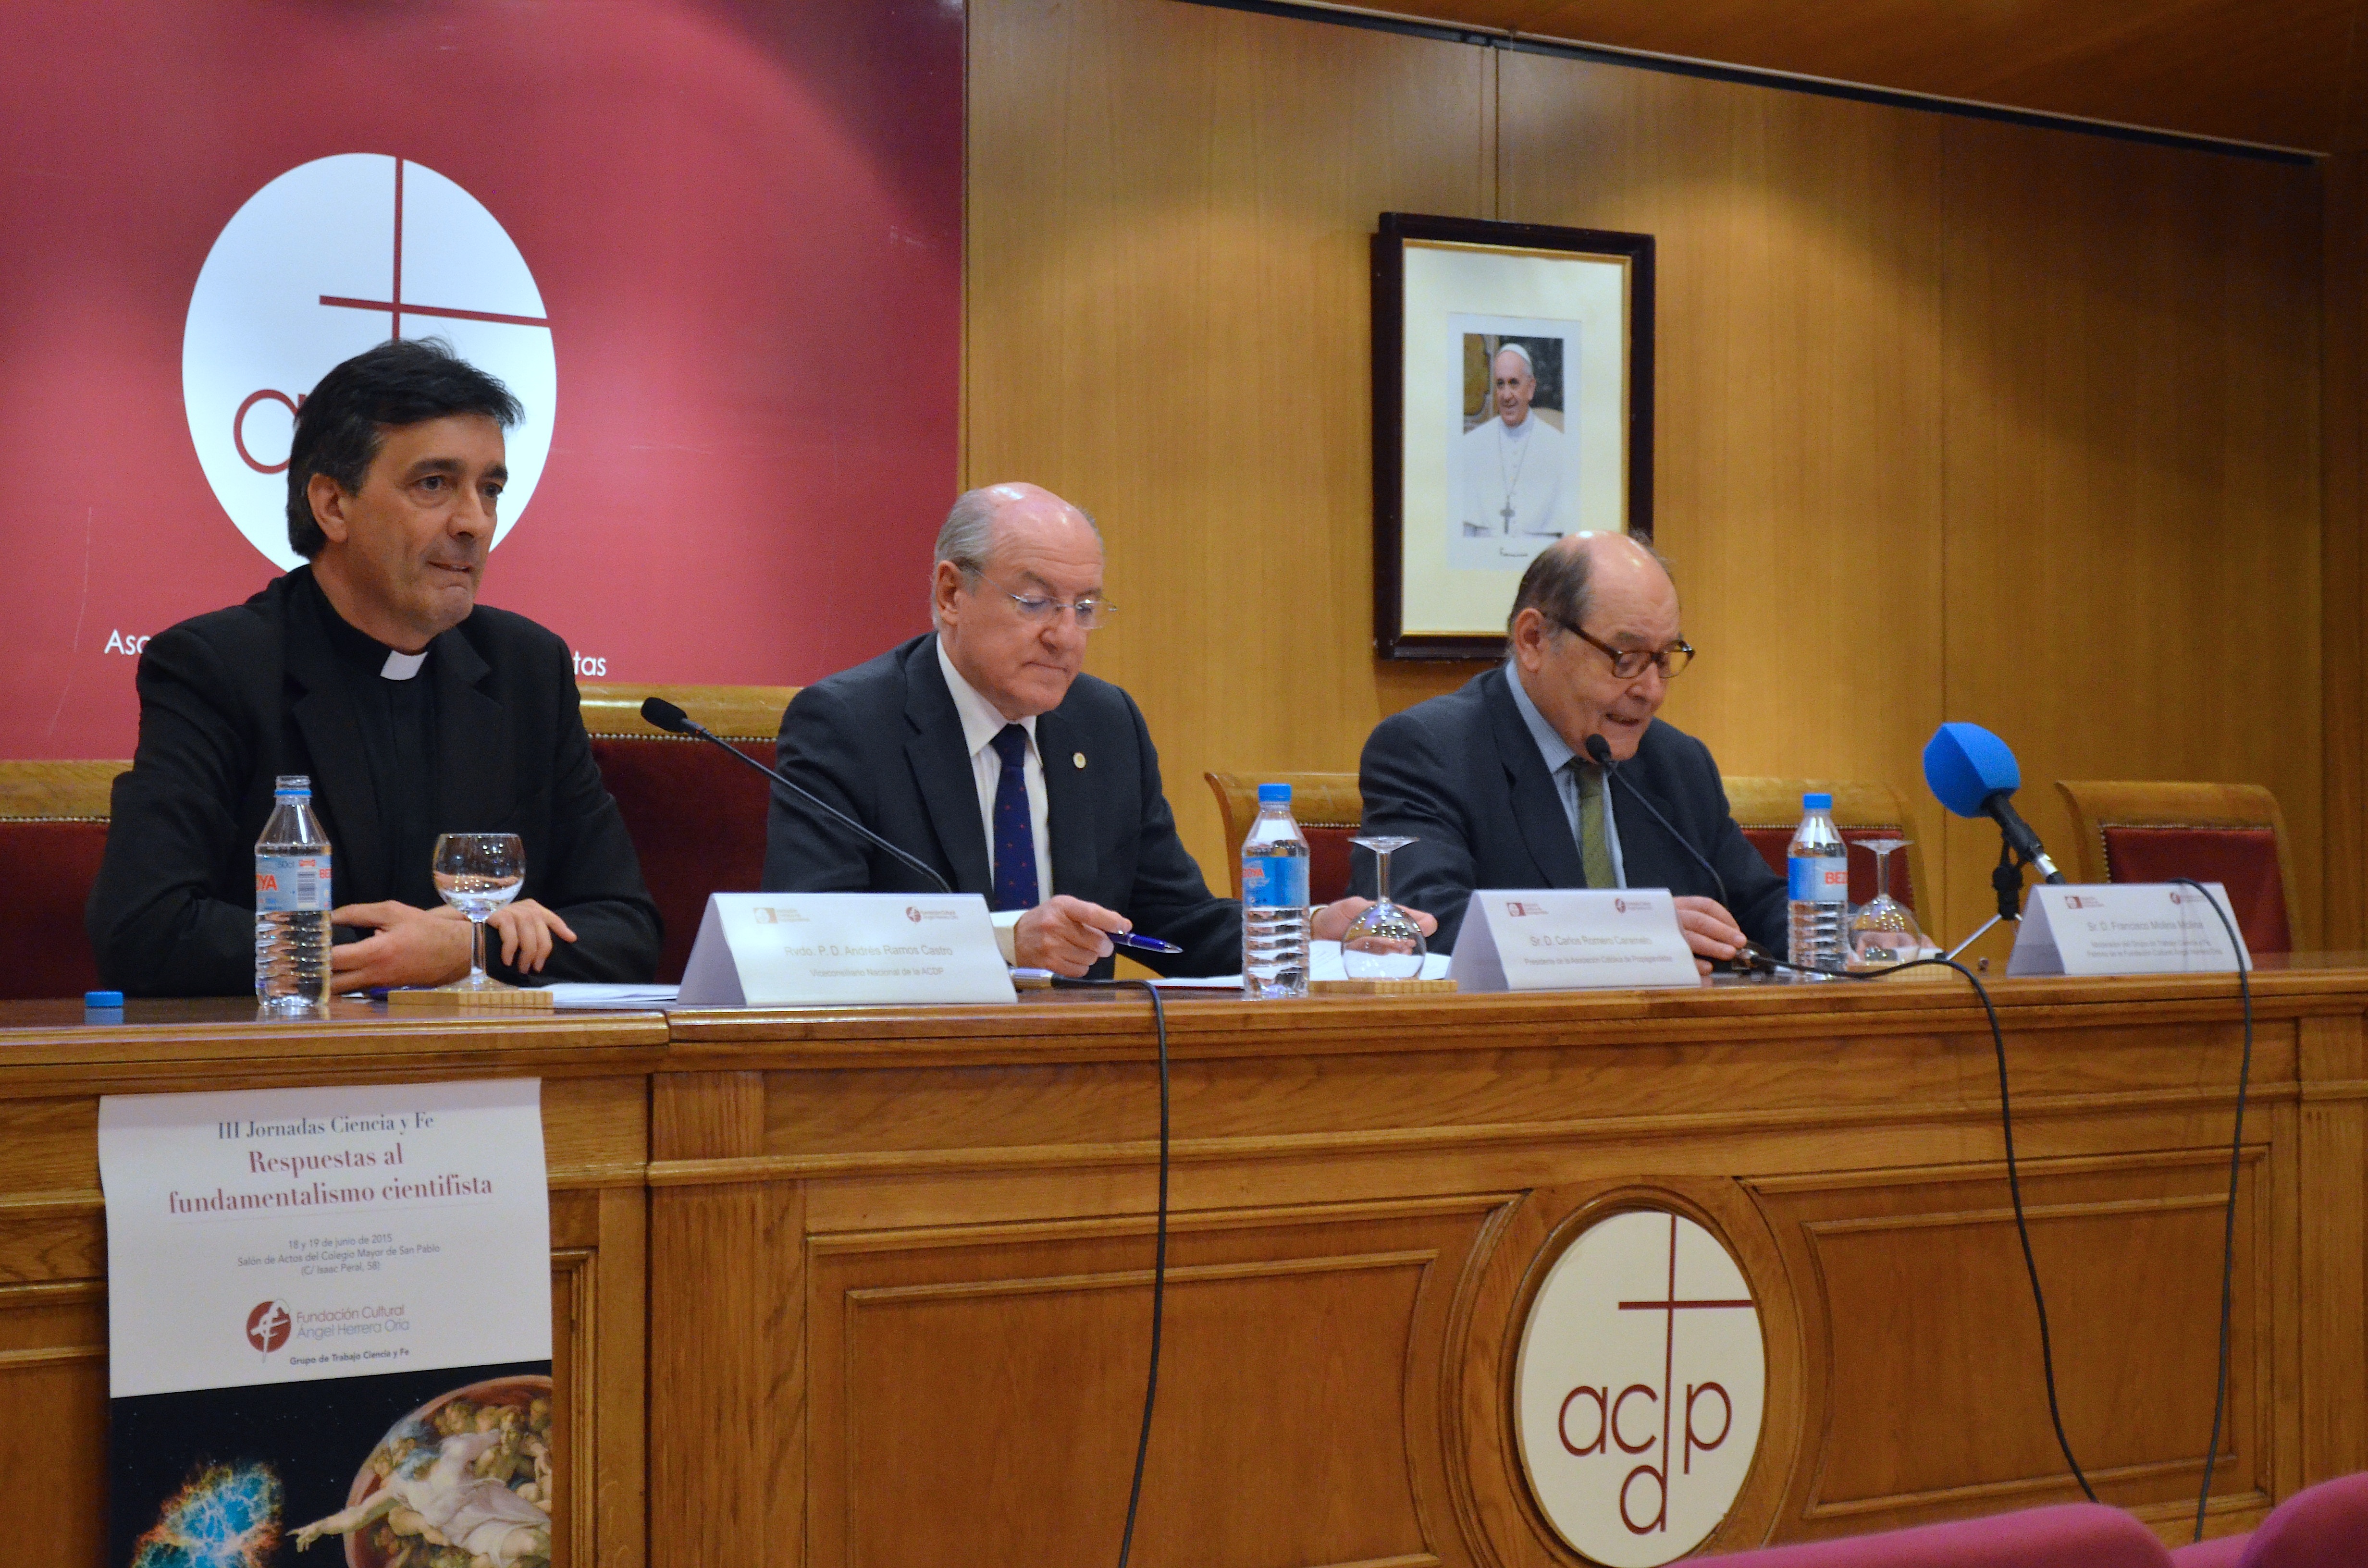 Opening of the Third Conference Science and Faith in Madrid